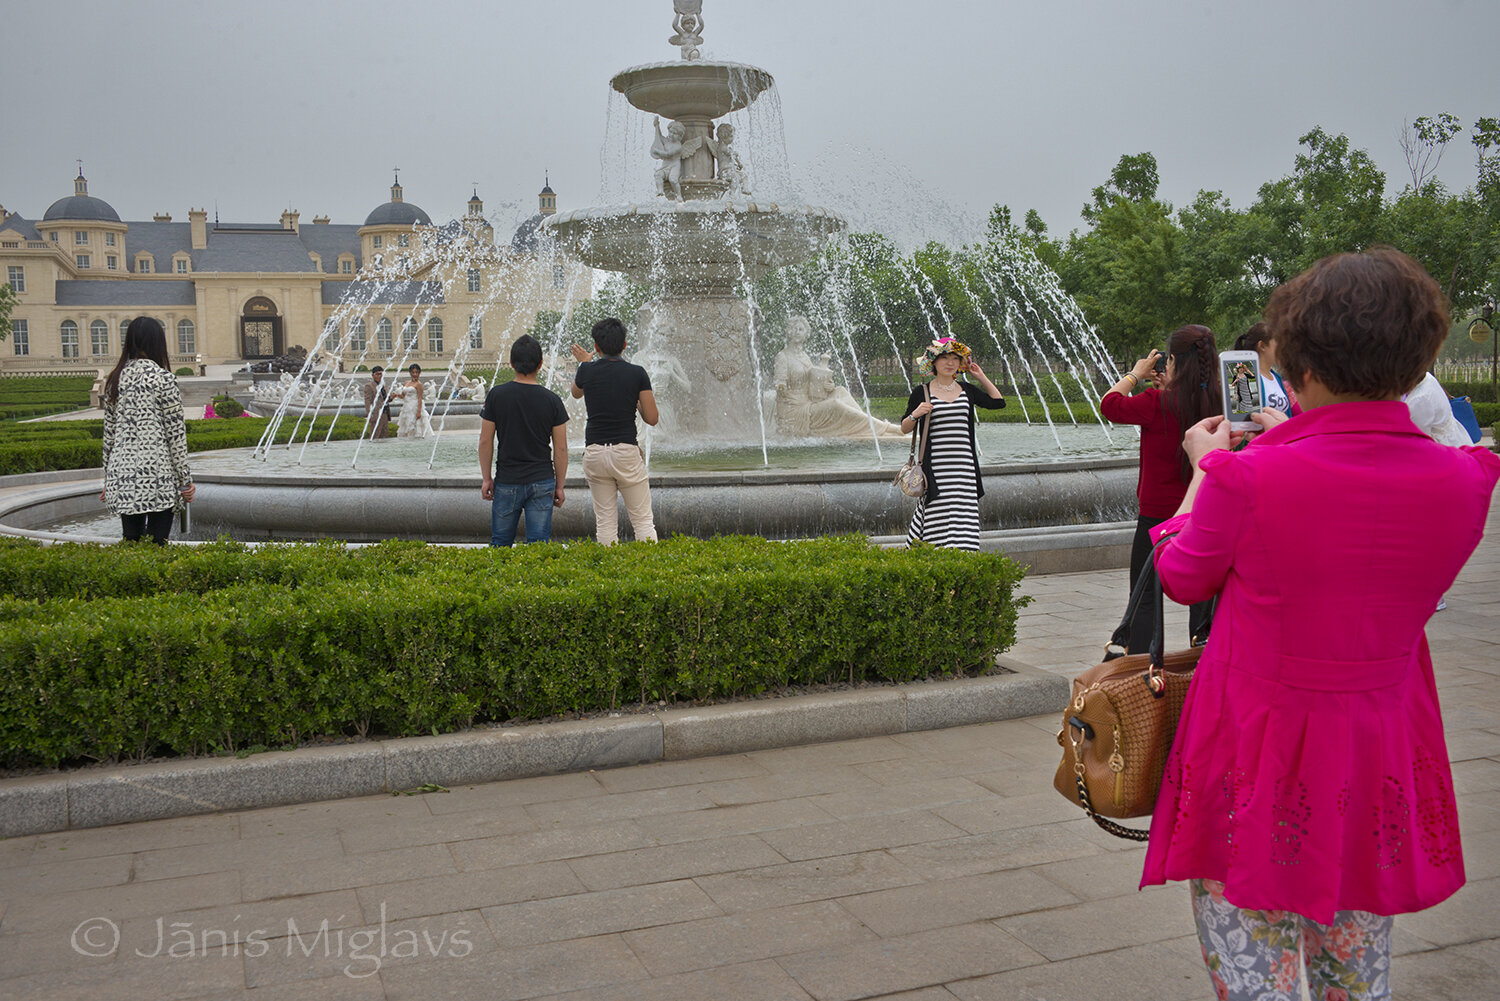 Chinese tourists photographing at one of the fountains.